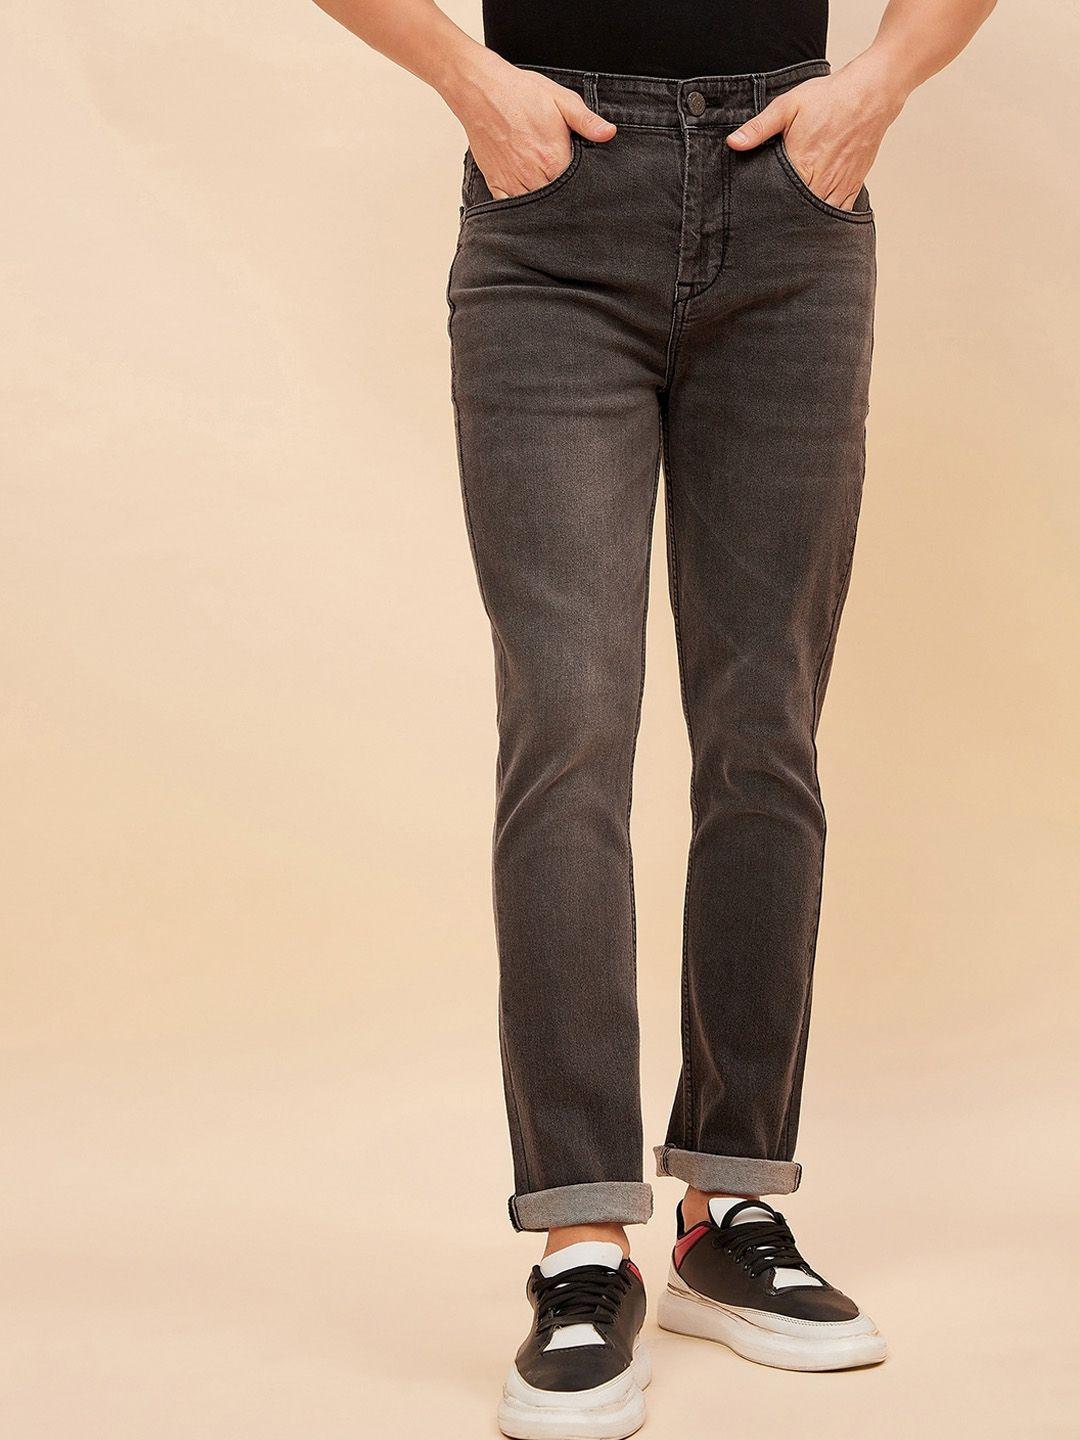 high-star-men-bootcut-mid-rise-light-fade-stretchable-jeans